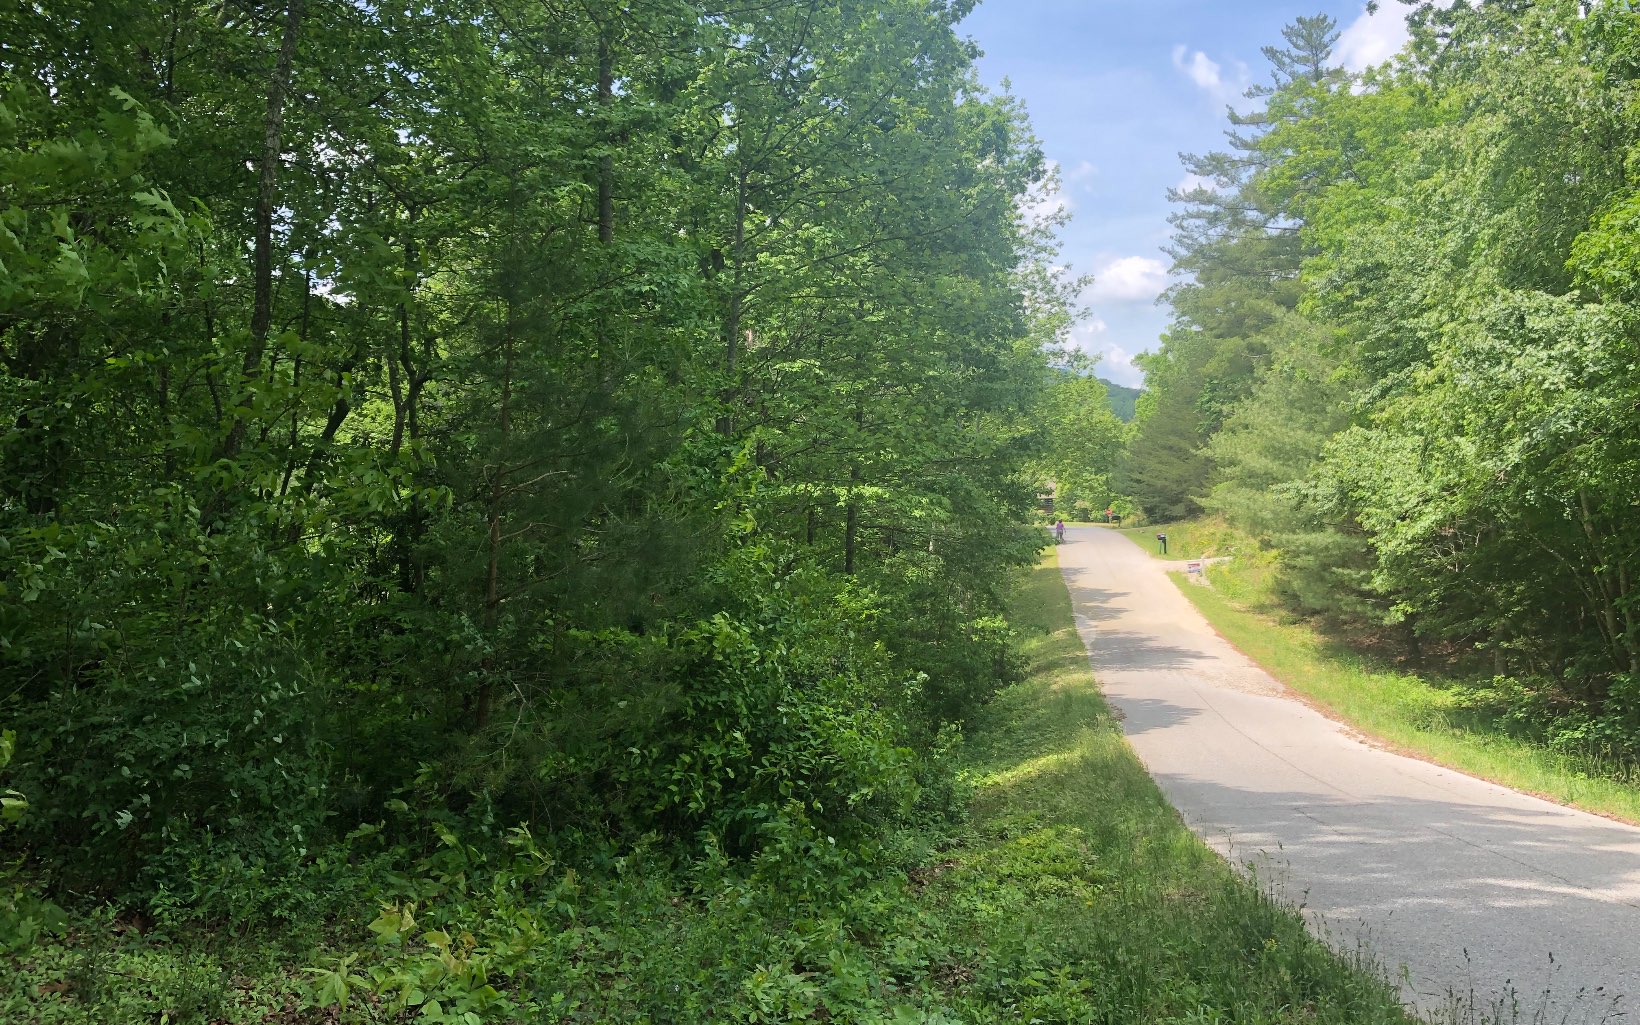 A great building lot in the heart of Blairsville. This 0.97 acre lot is less than 2 miles from Downtown Blairsville on Town Mountain. An established neighborhood with beautiful homes and minimal restrictions. The lot has a small creek (branch) on the property and seasonal views. Underground utilities and community well system in place.